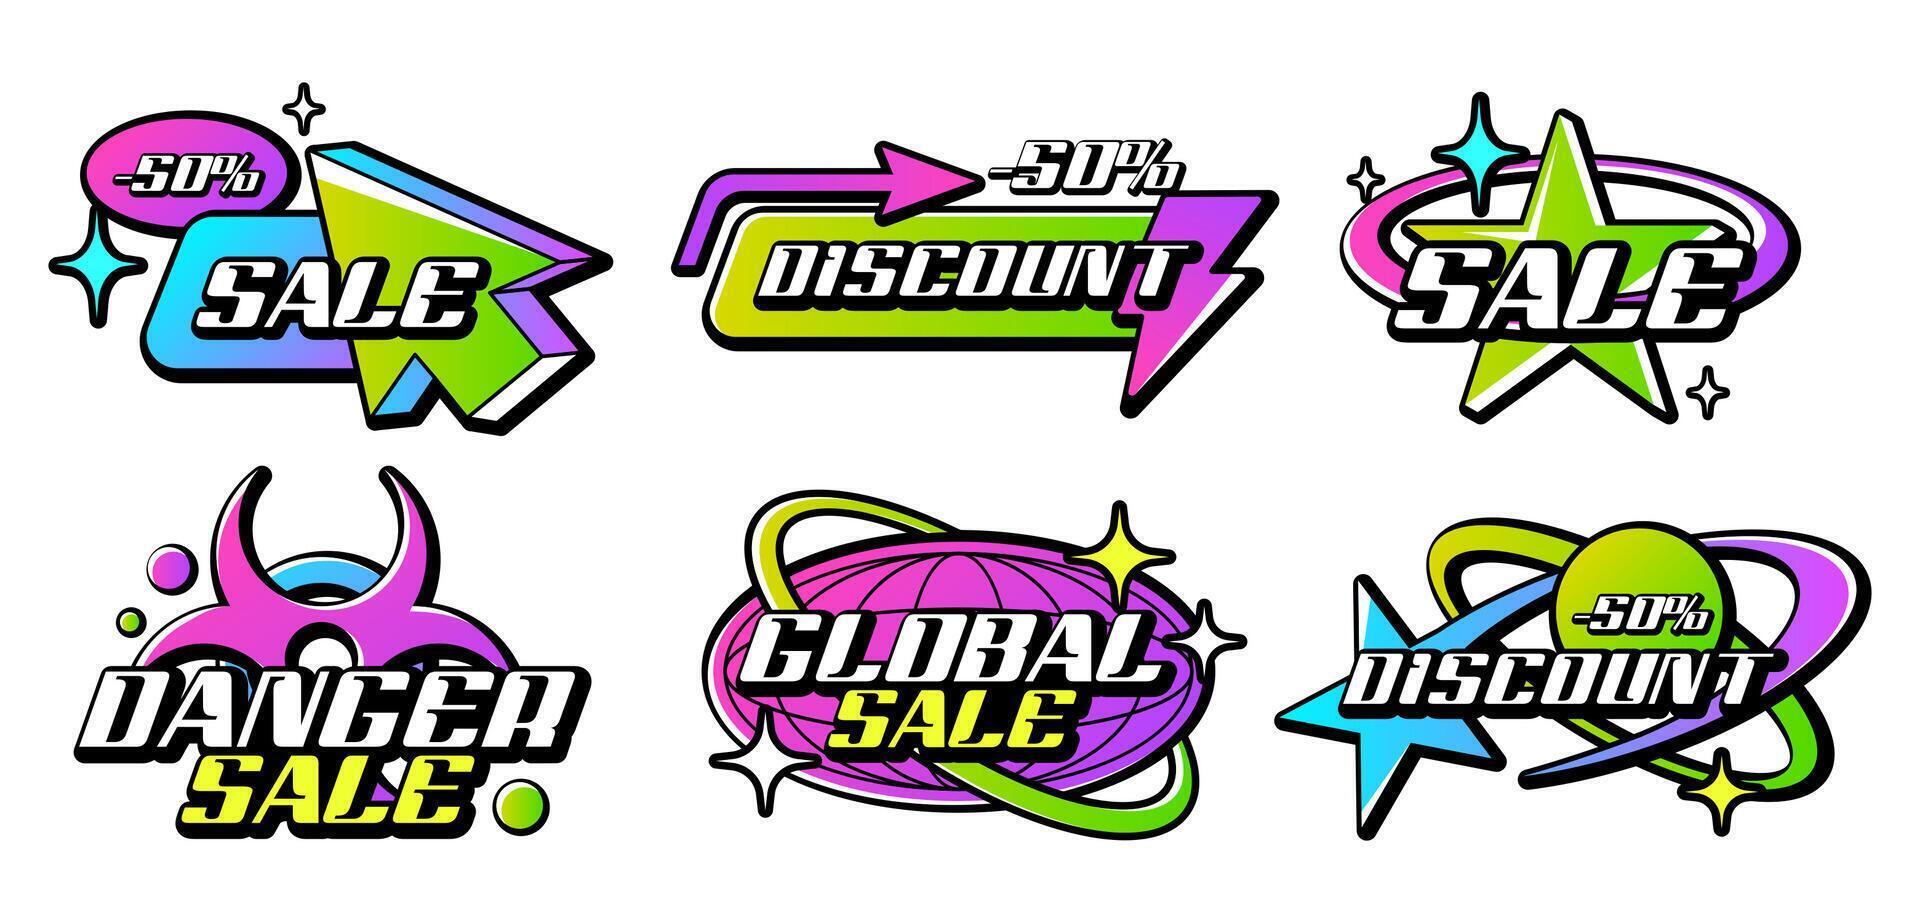 Trendy colorful Y2k logo collection. Retro acid gradient lettering logos with graphic elements for sale or discount store. Set of sticker, badges, slogan typography vector icon design illustration